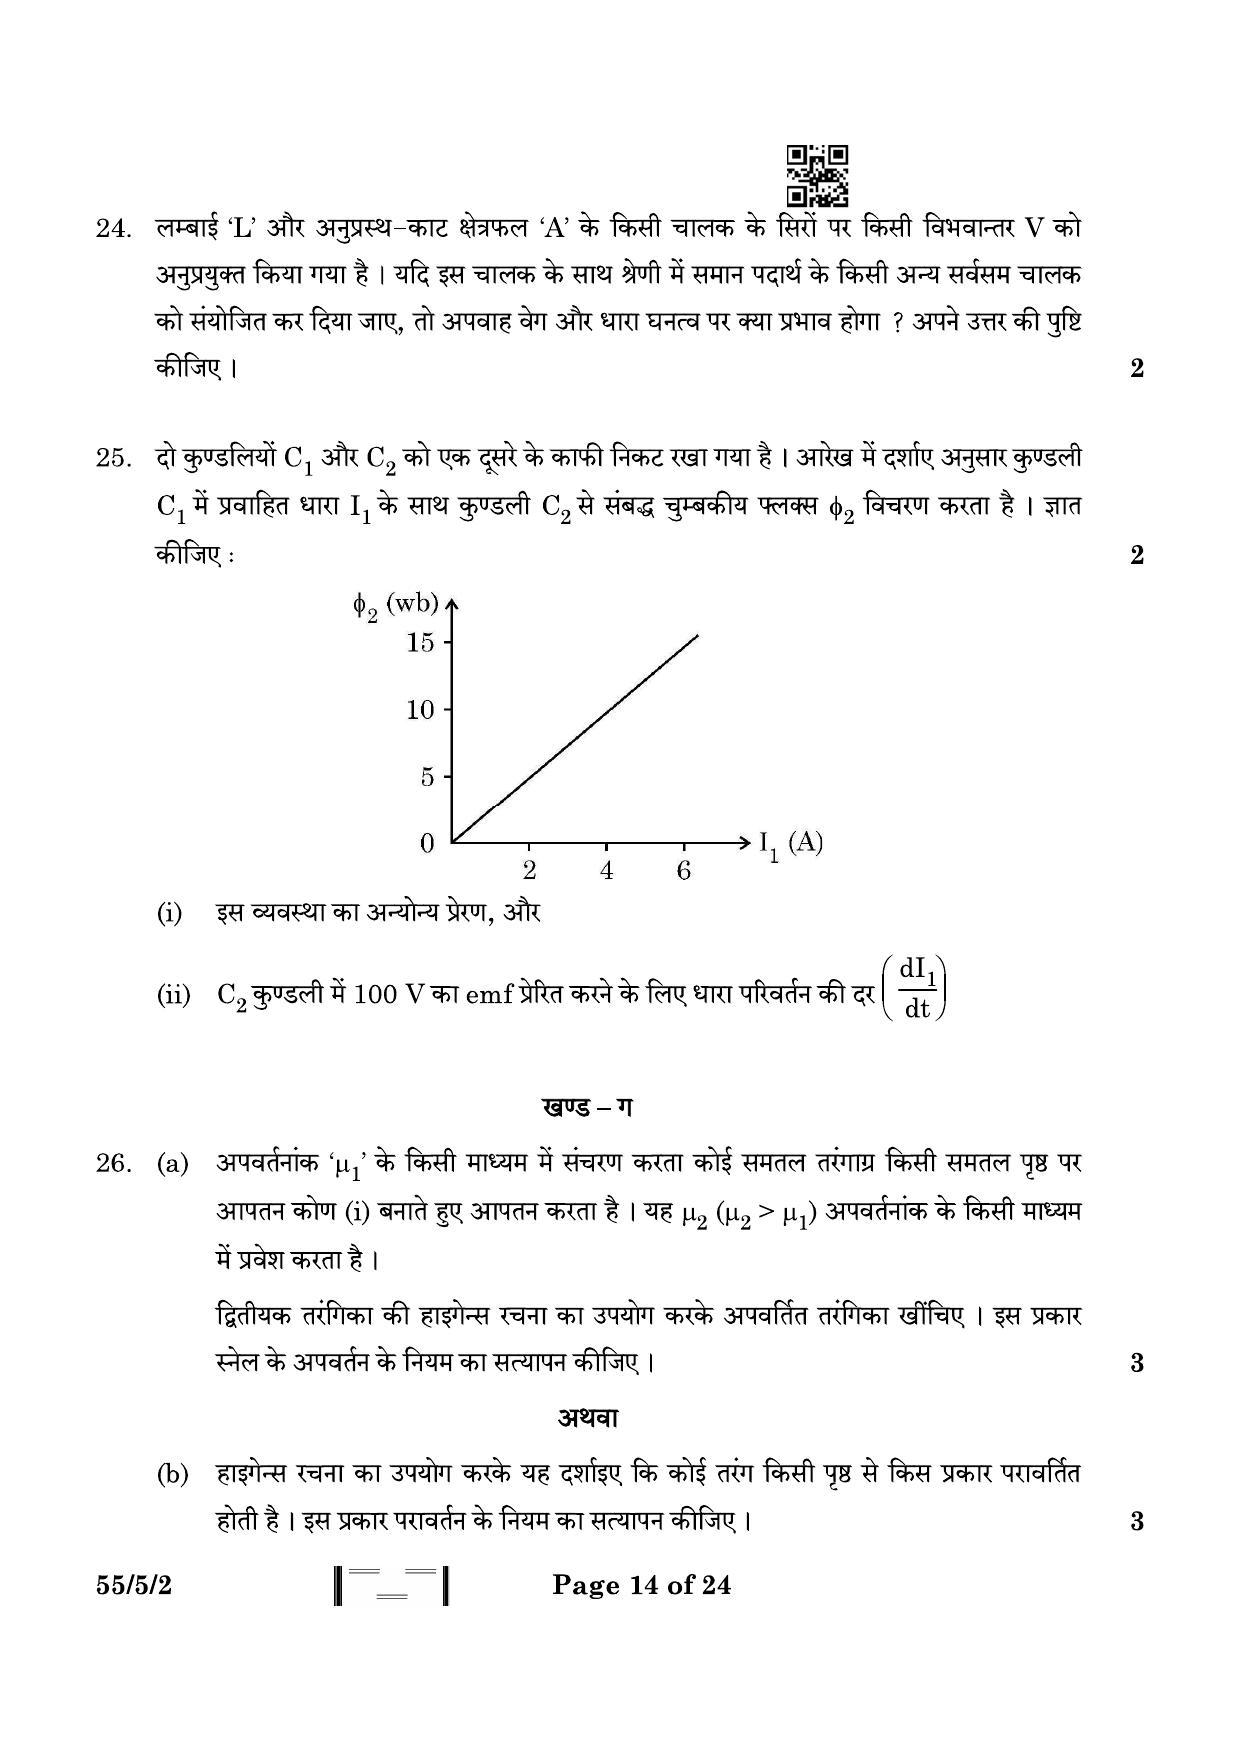 CBSE Class 12 55-5-2 Physics 2023 Question Paper - Page 14